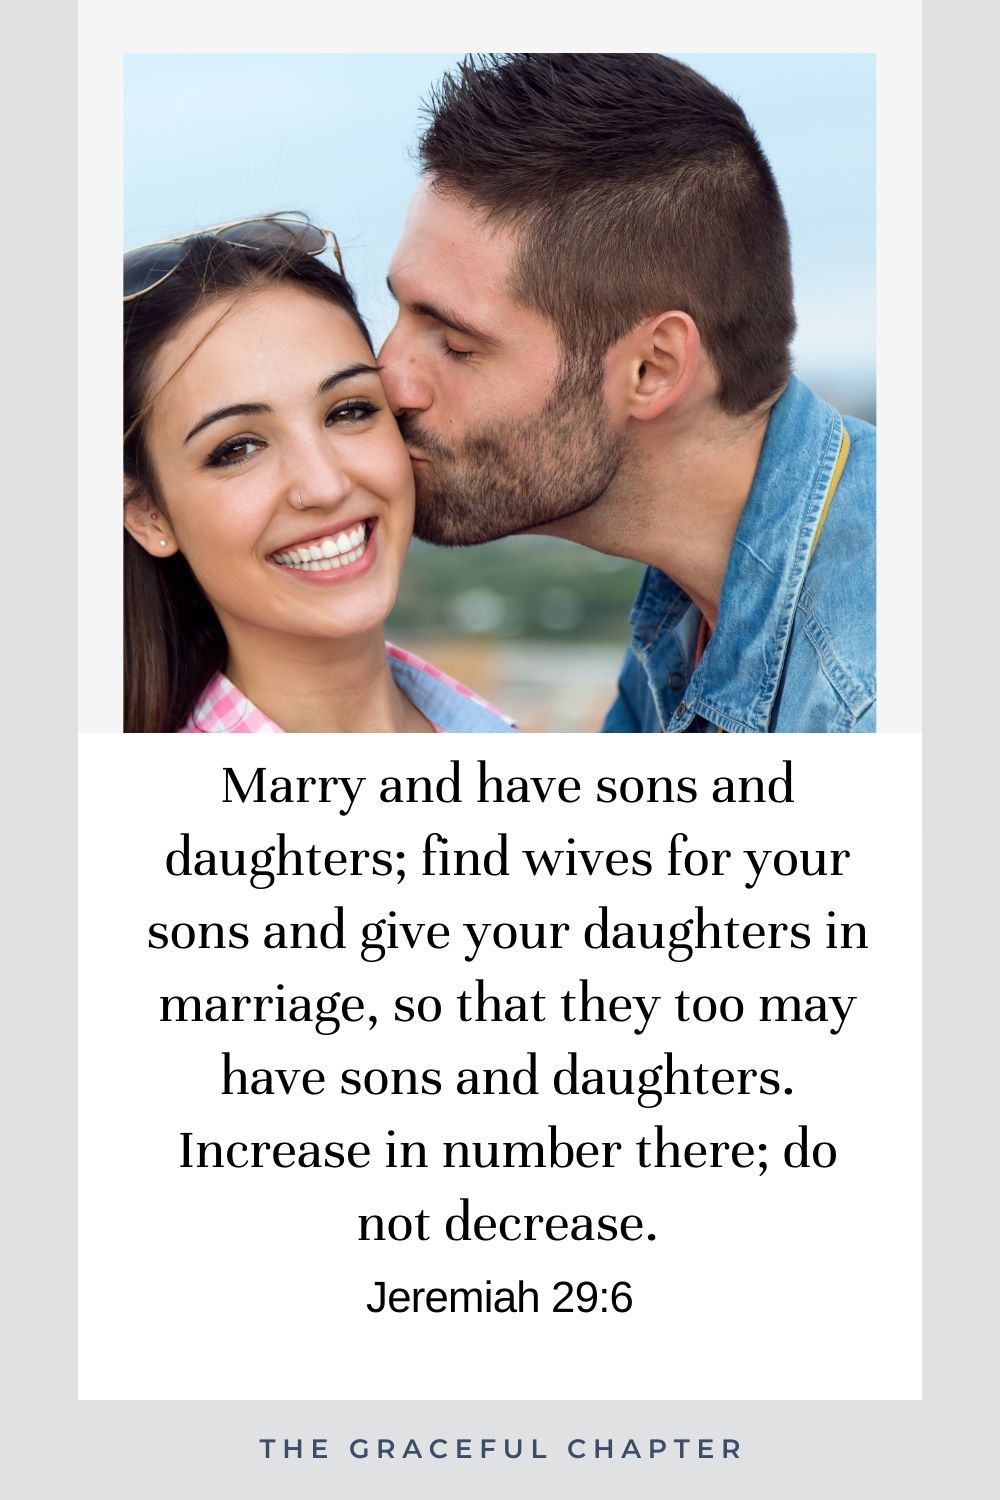 Marry and have sons and daughters; find wives for your sons and give your daughters in marriage, so that they too may have sons and daughters. Increase in number there; do not decrease. Jeremiah 29:6